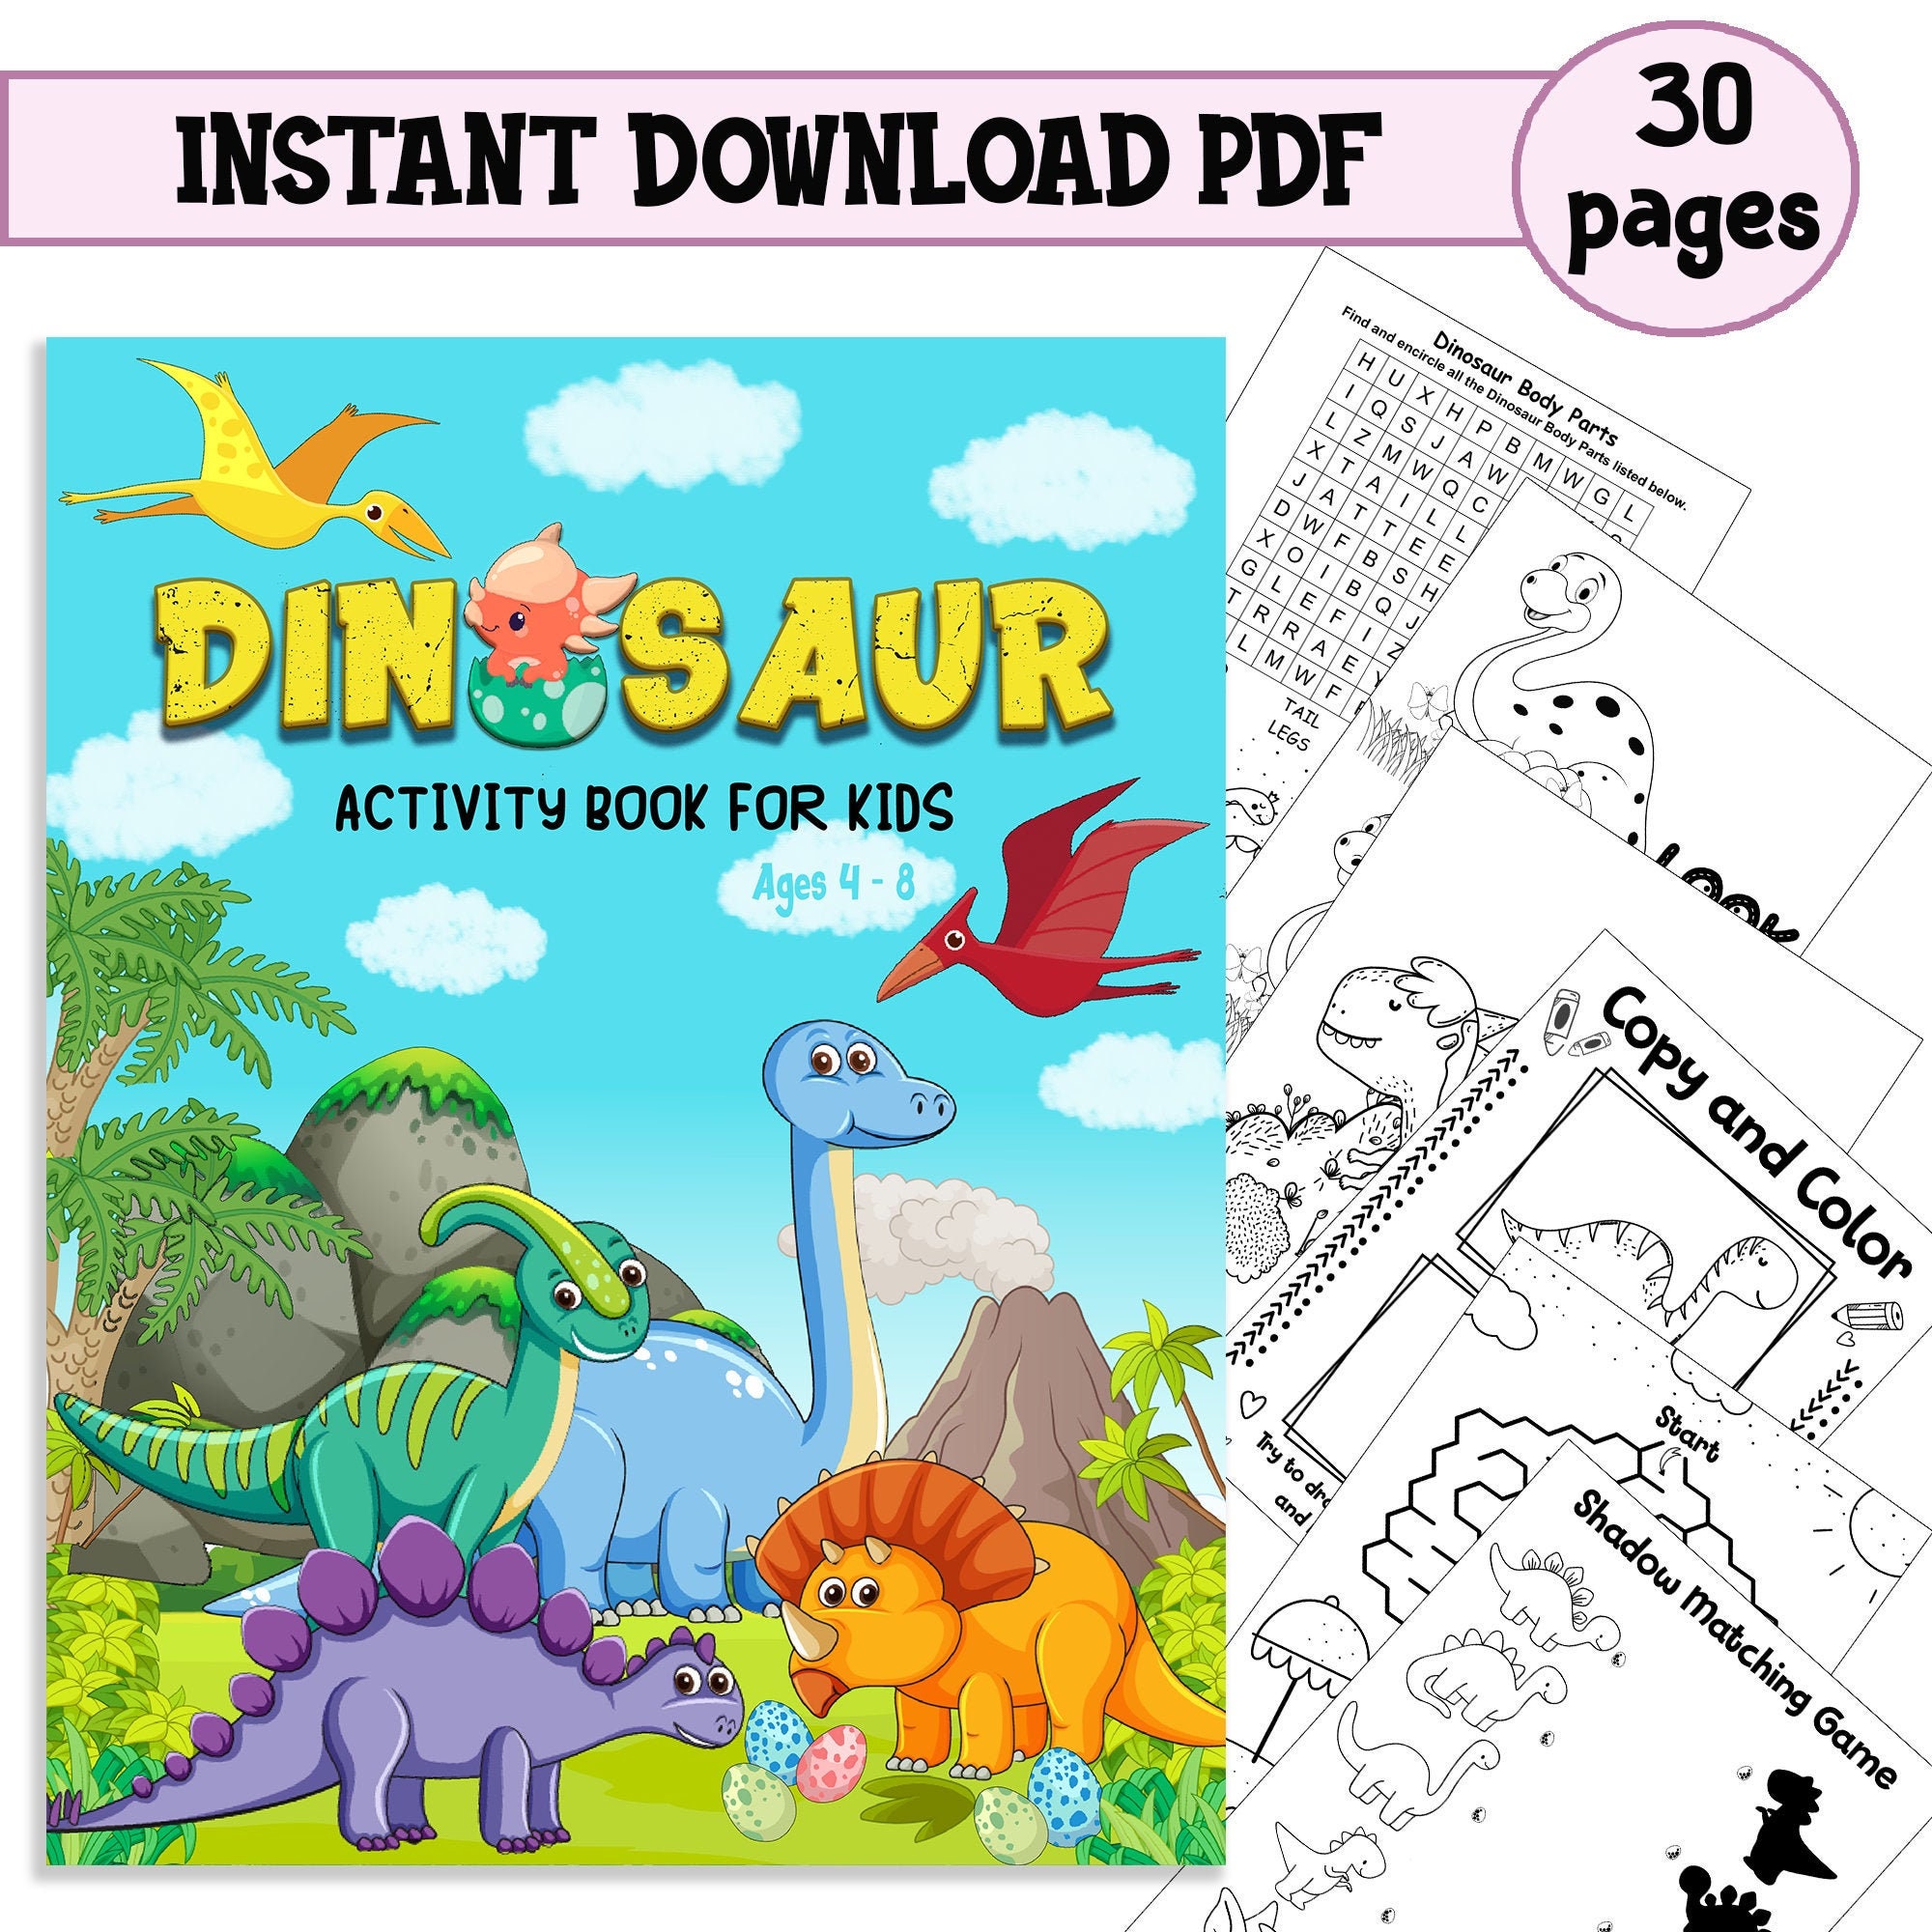 How To Draw Dinosaurs for Kids: Learn to Draw for Kids Ages 4-8